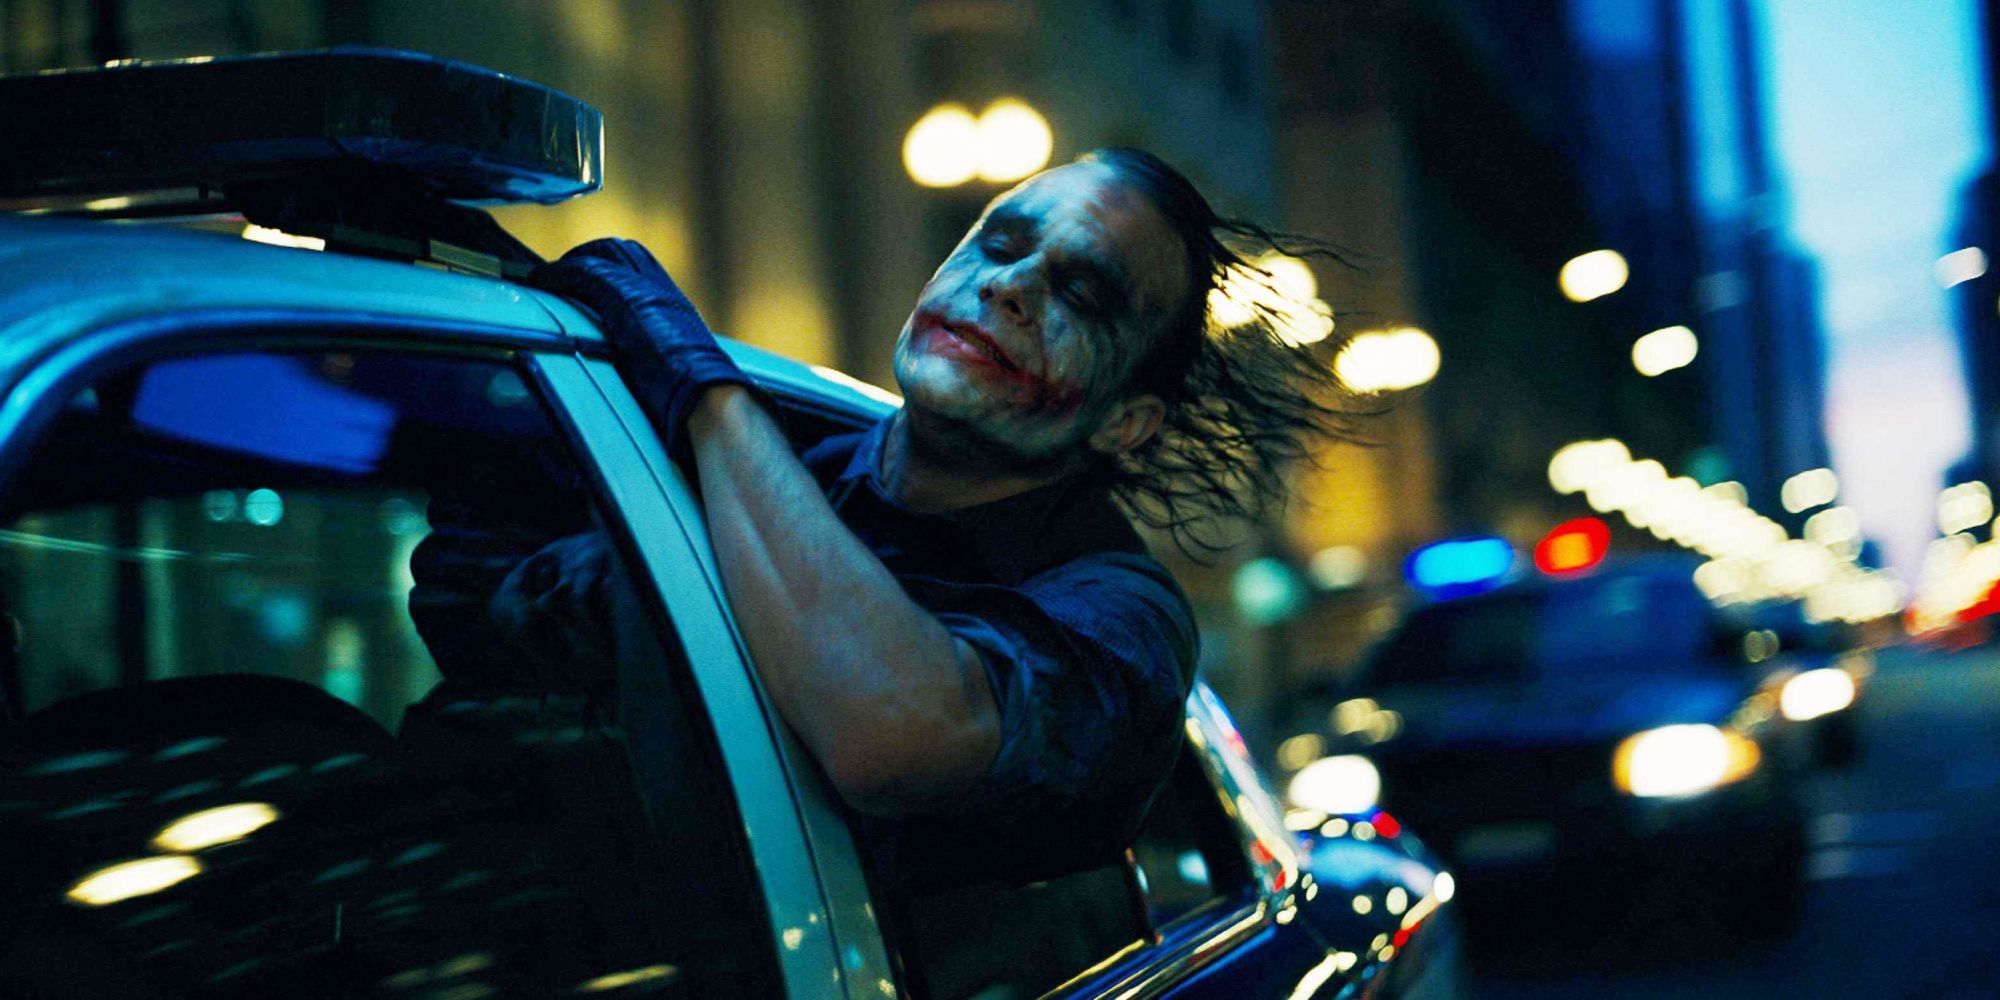 Heath Ledger as The Joker sticks his head out the window in The Dark Knight.